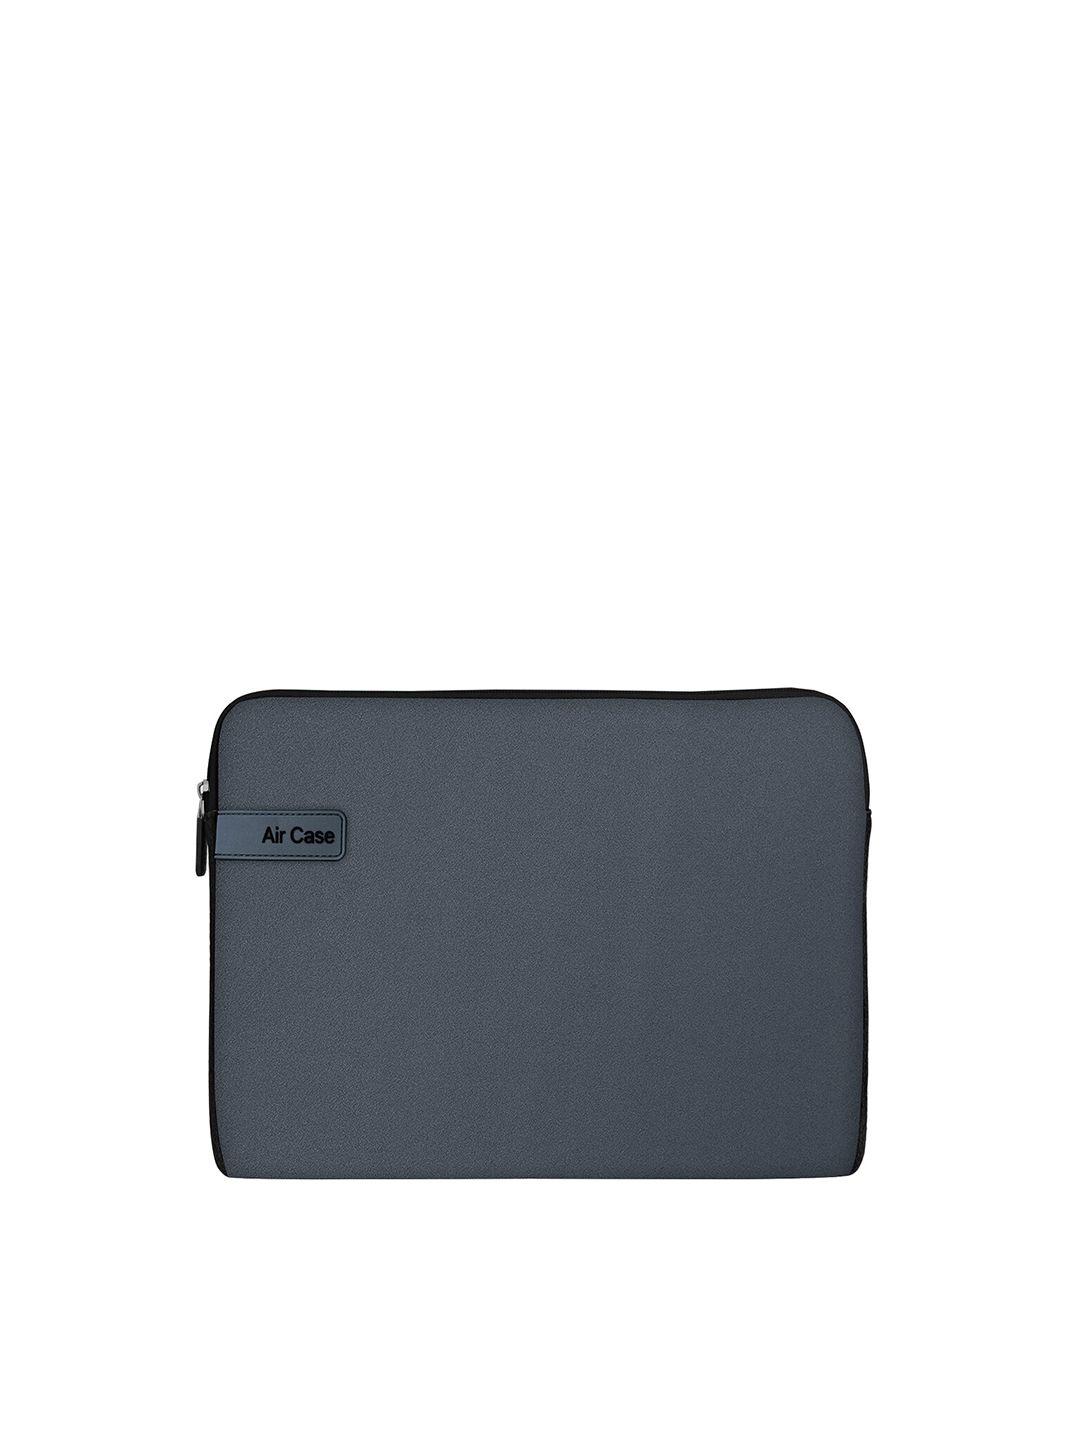 aircase unisex grey solid 15.6 inch laptop sleeve